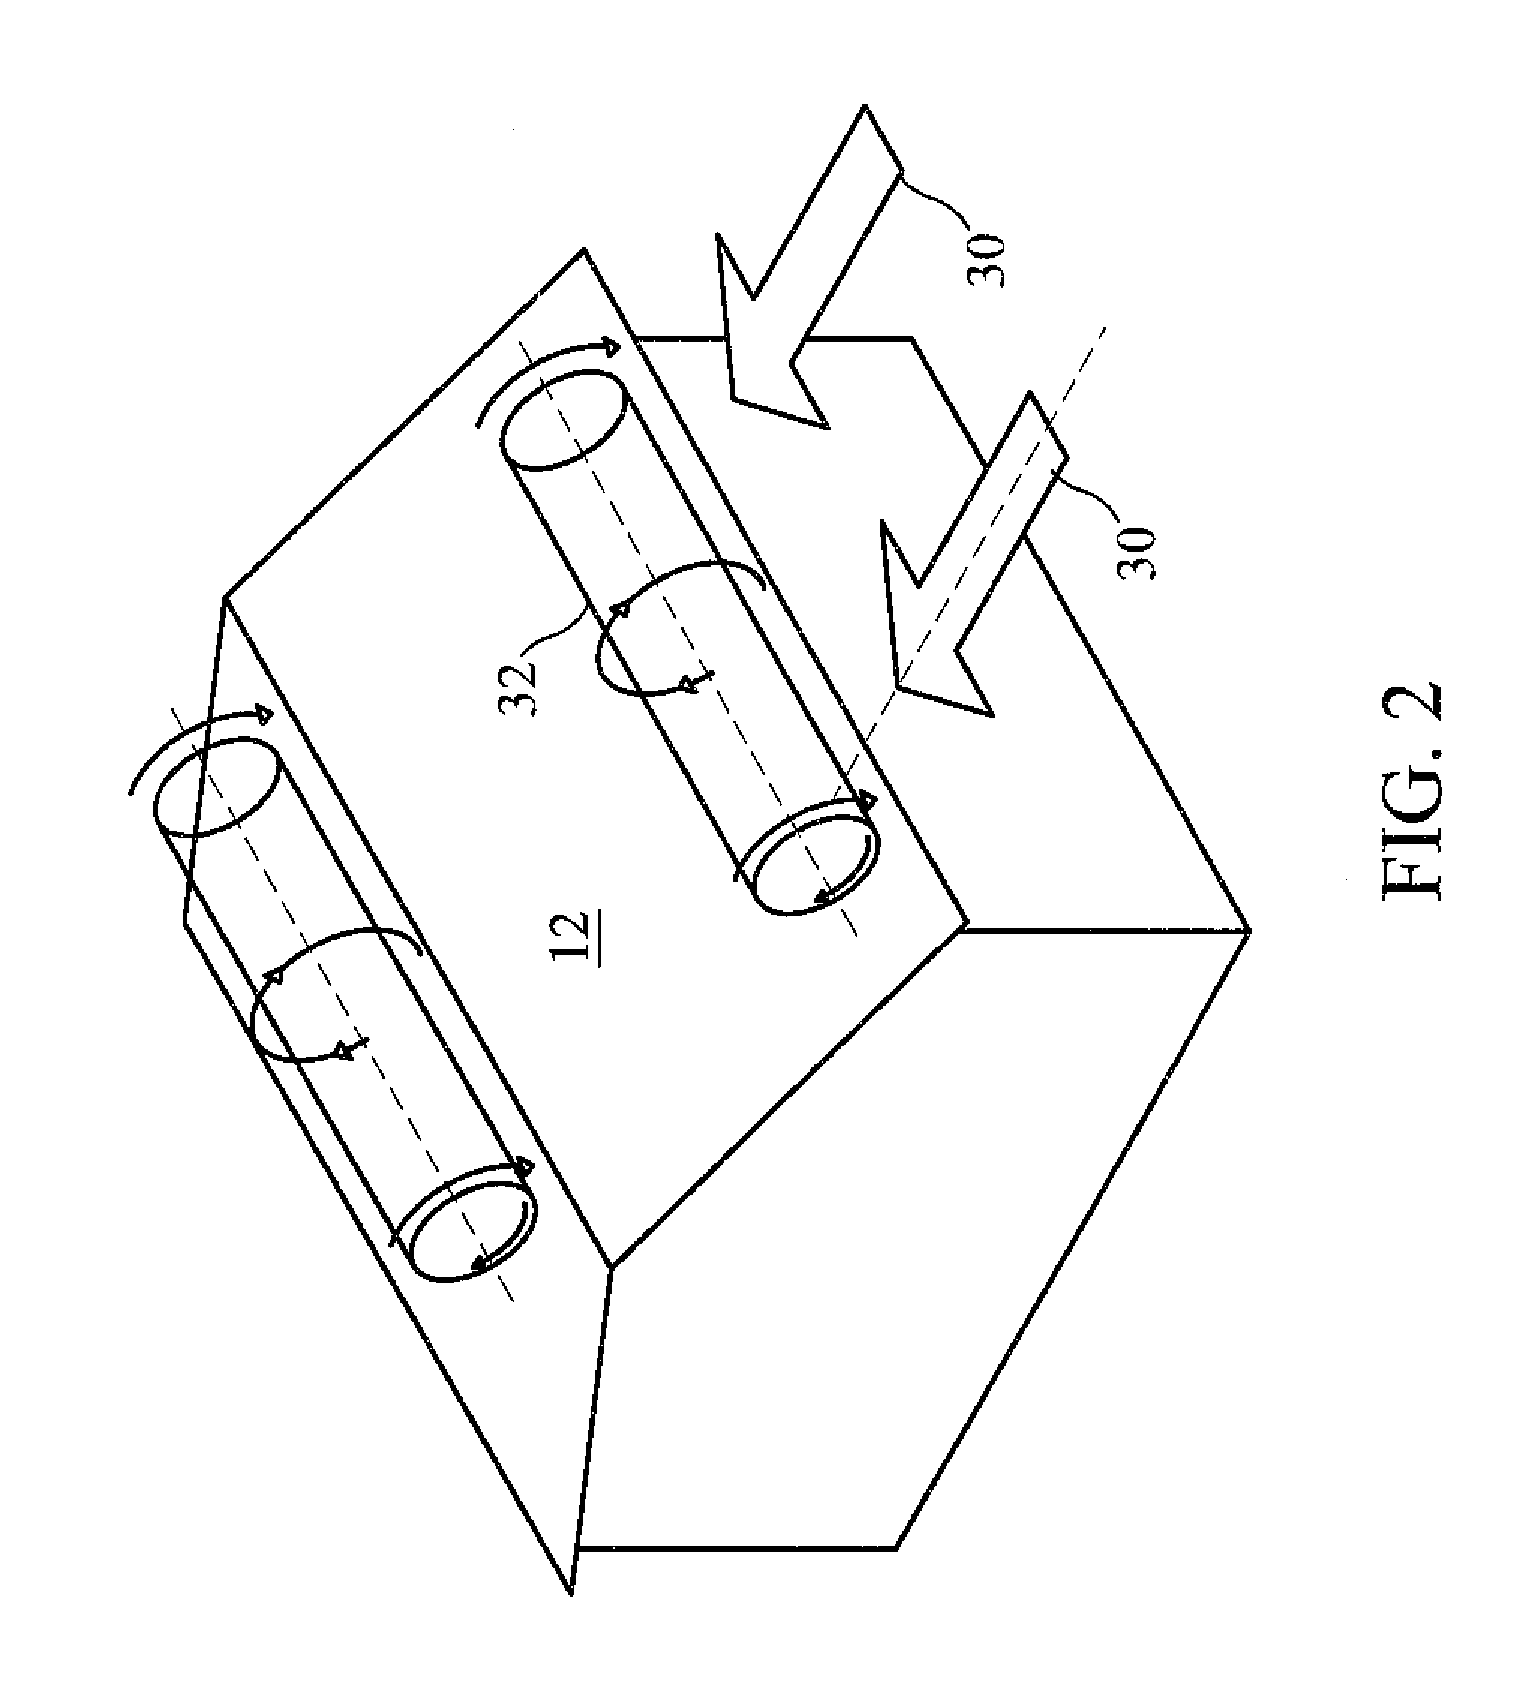 Wind mitigation and wind power device